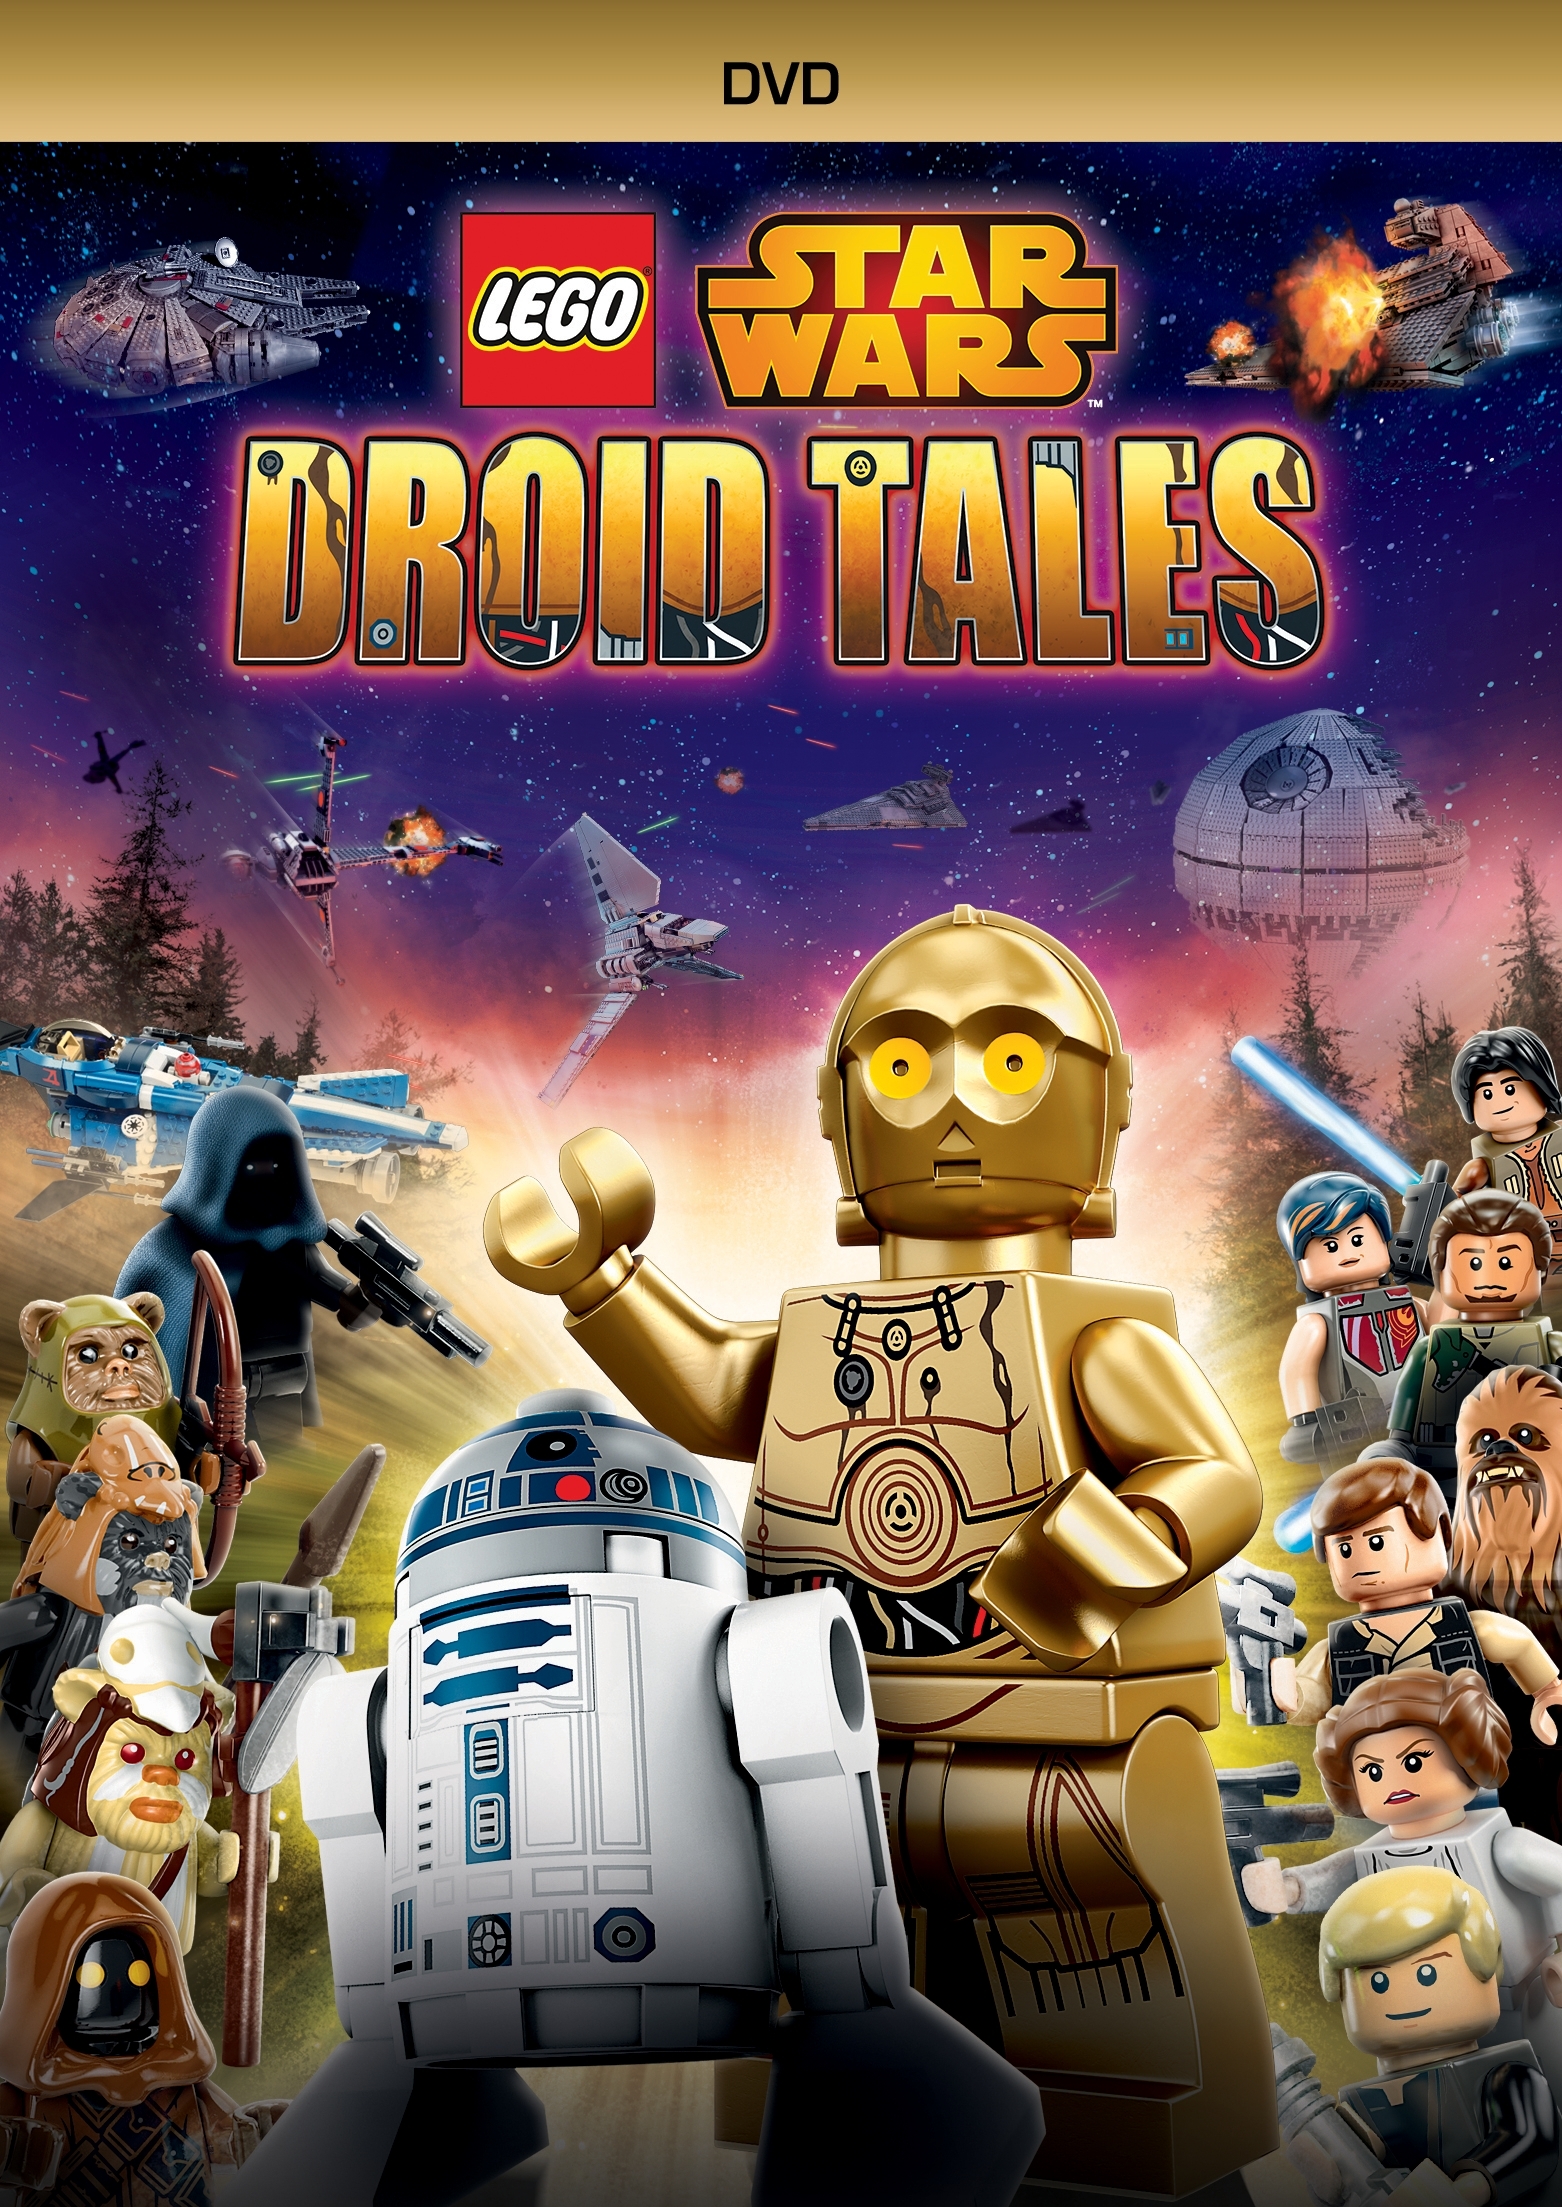 LEGO DROID TALES (DVD) 5005061 Star Wars™ | Buy at the Official LEGO® US